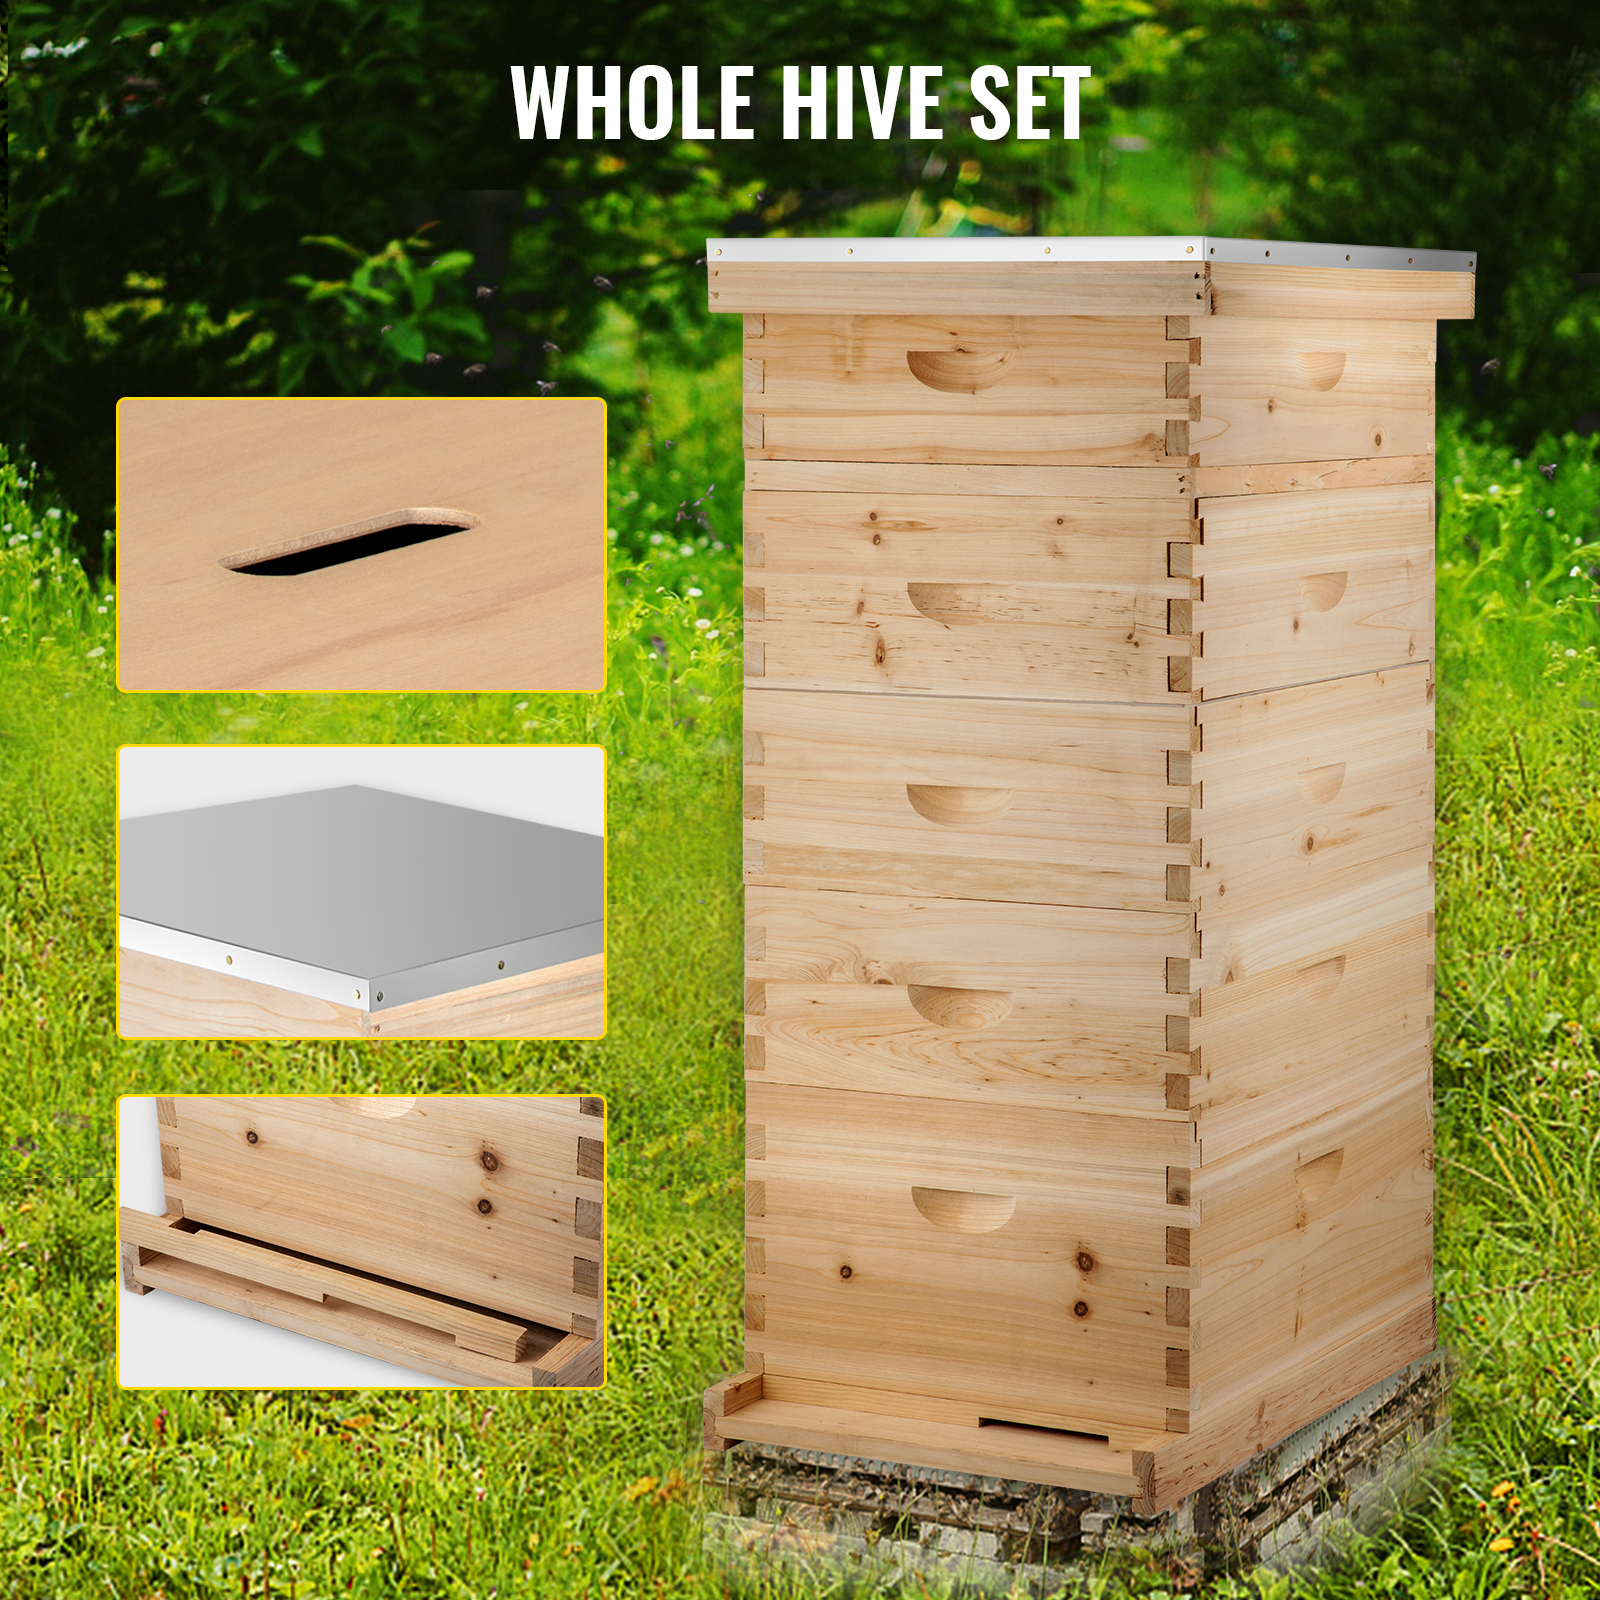 5 Box 10-Frame size Beehive Frames /Bee Hive Frame/ Bee House for Beekeeping 